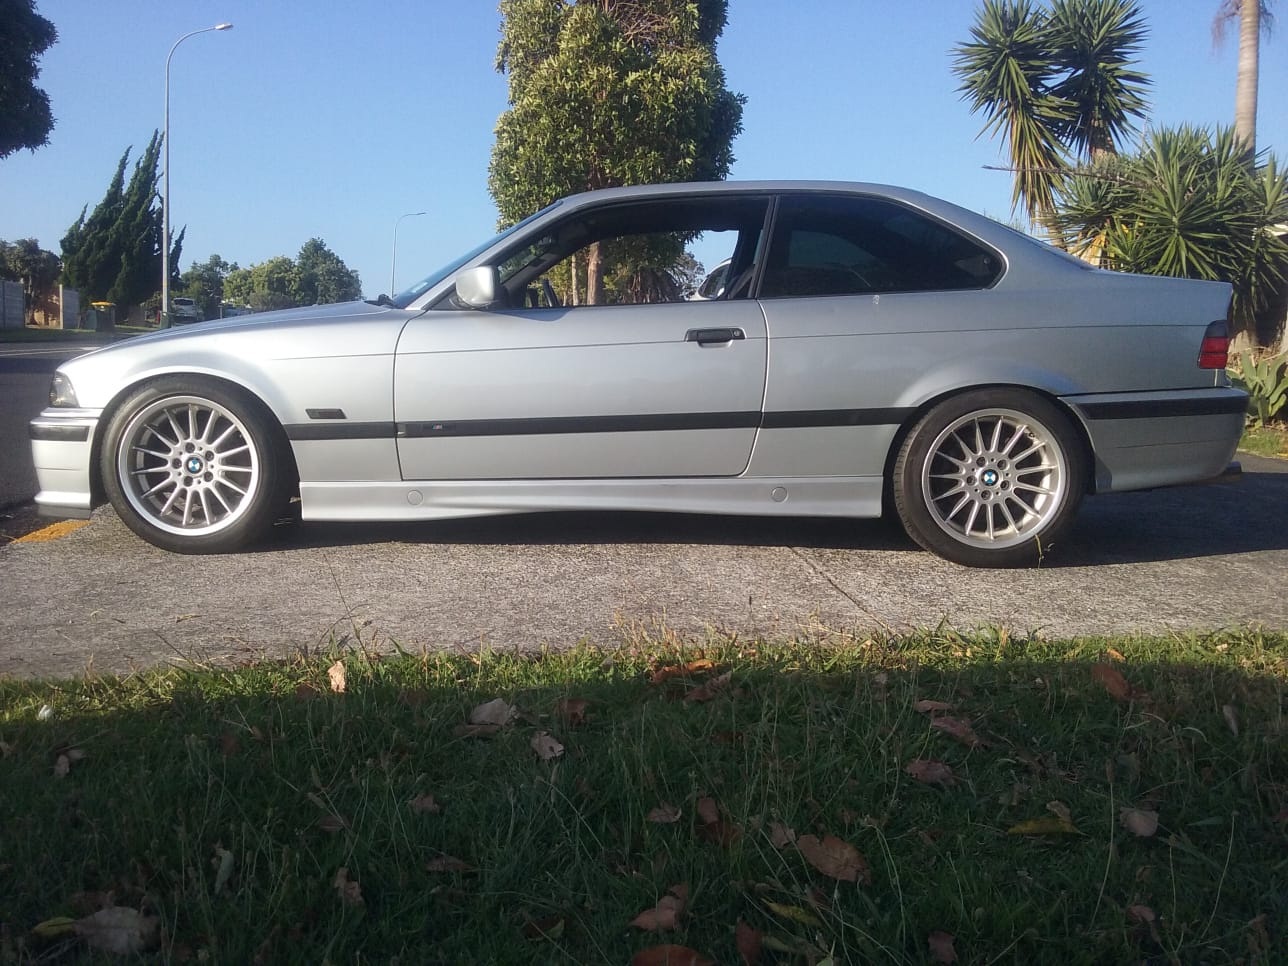 Solo Werks Coilovers on my BMW E36 328i